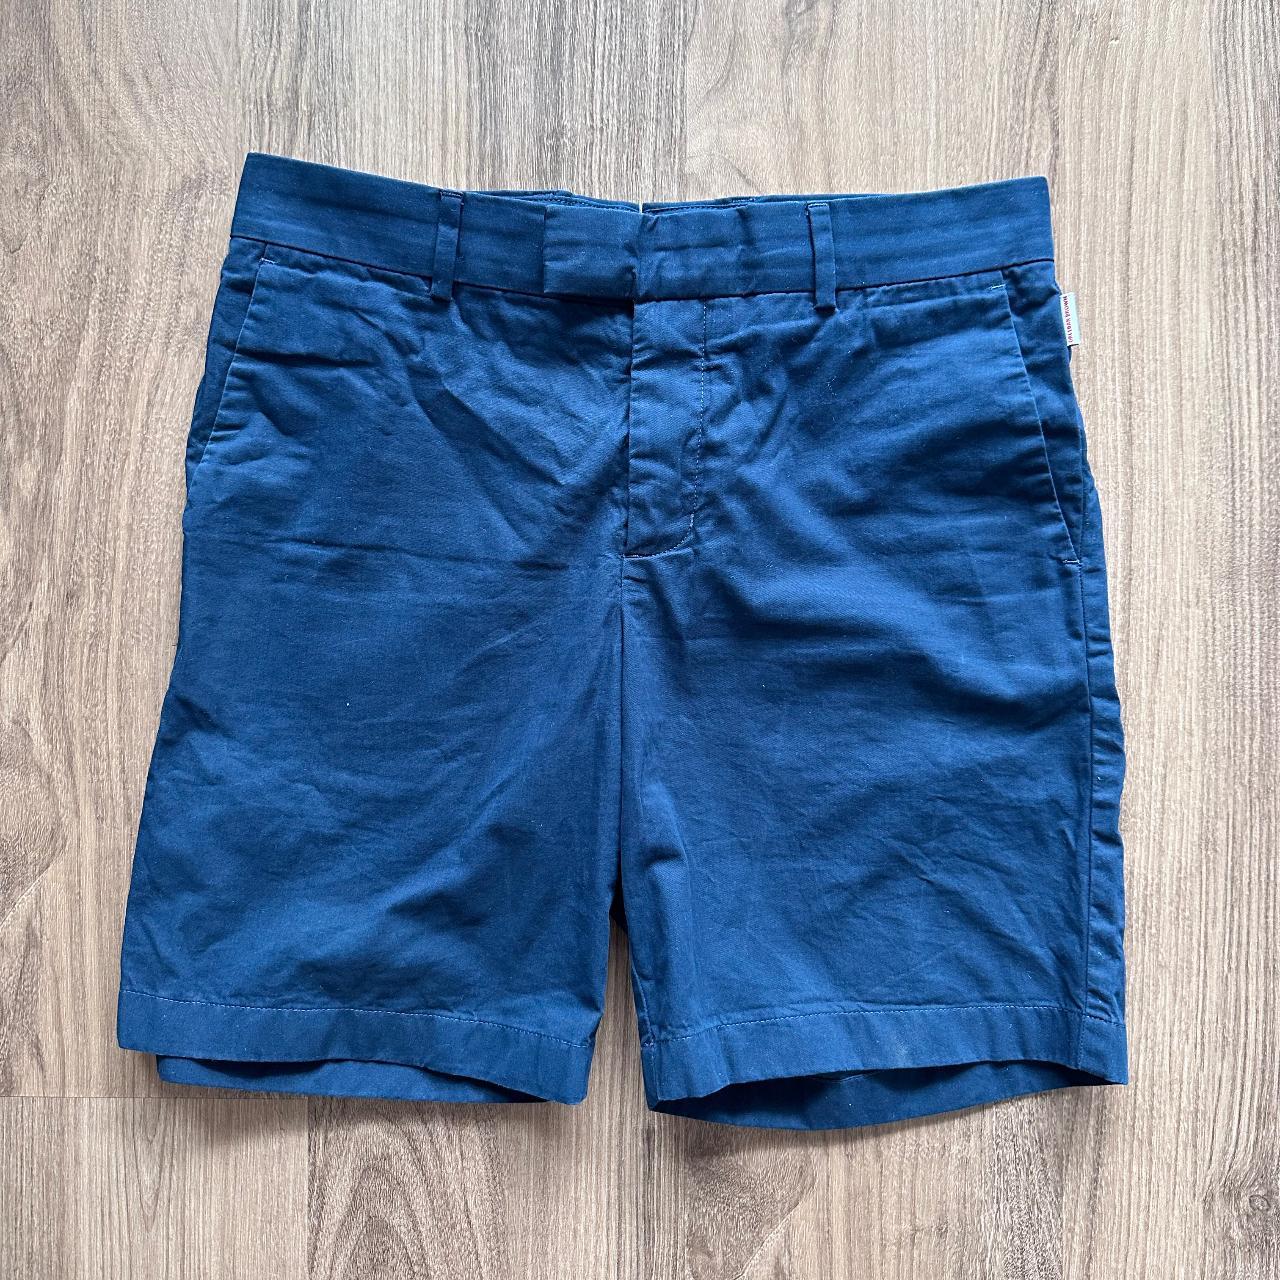 Orlebar Brown Men's Blue and Navy Shorts